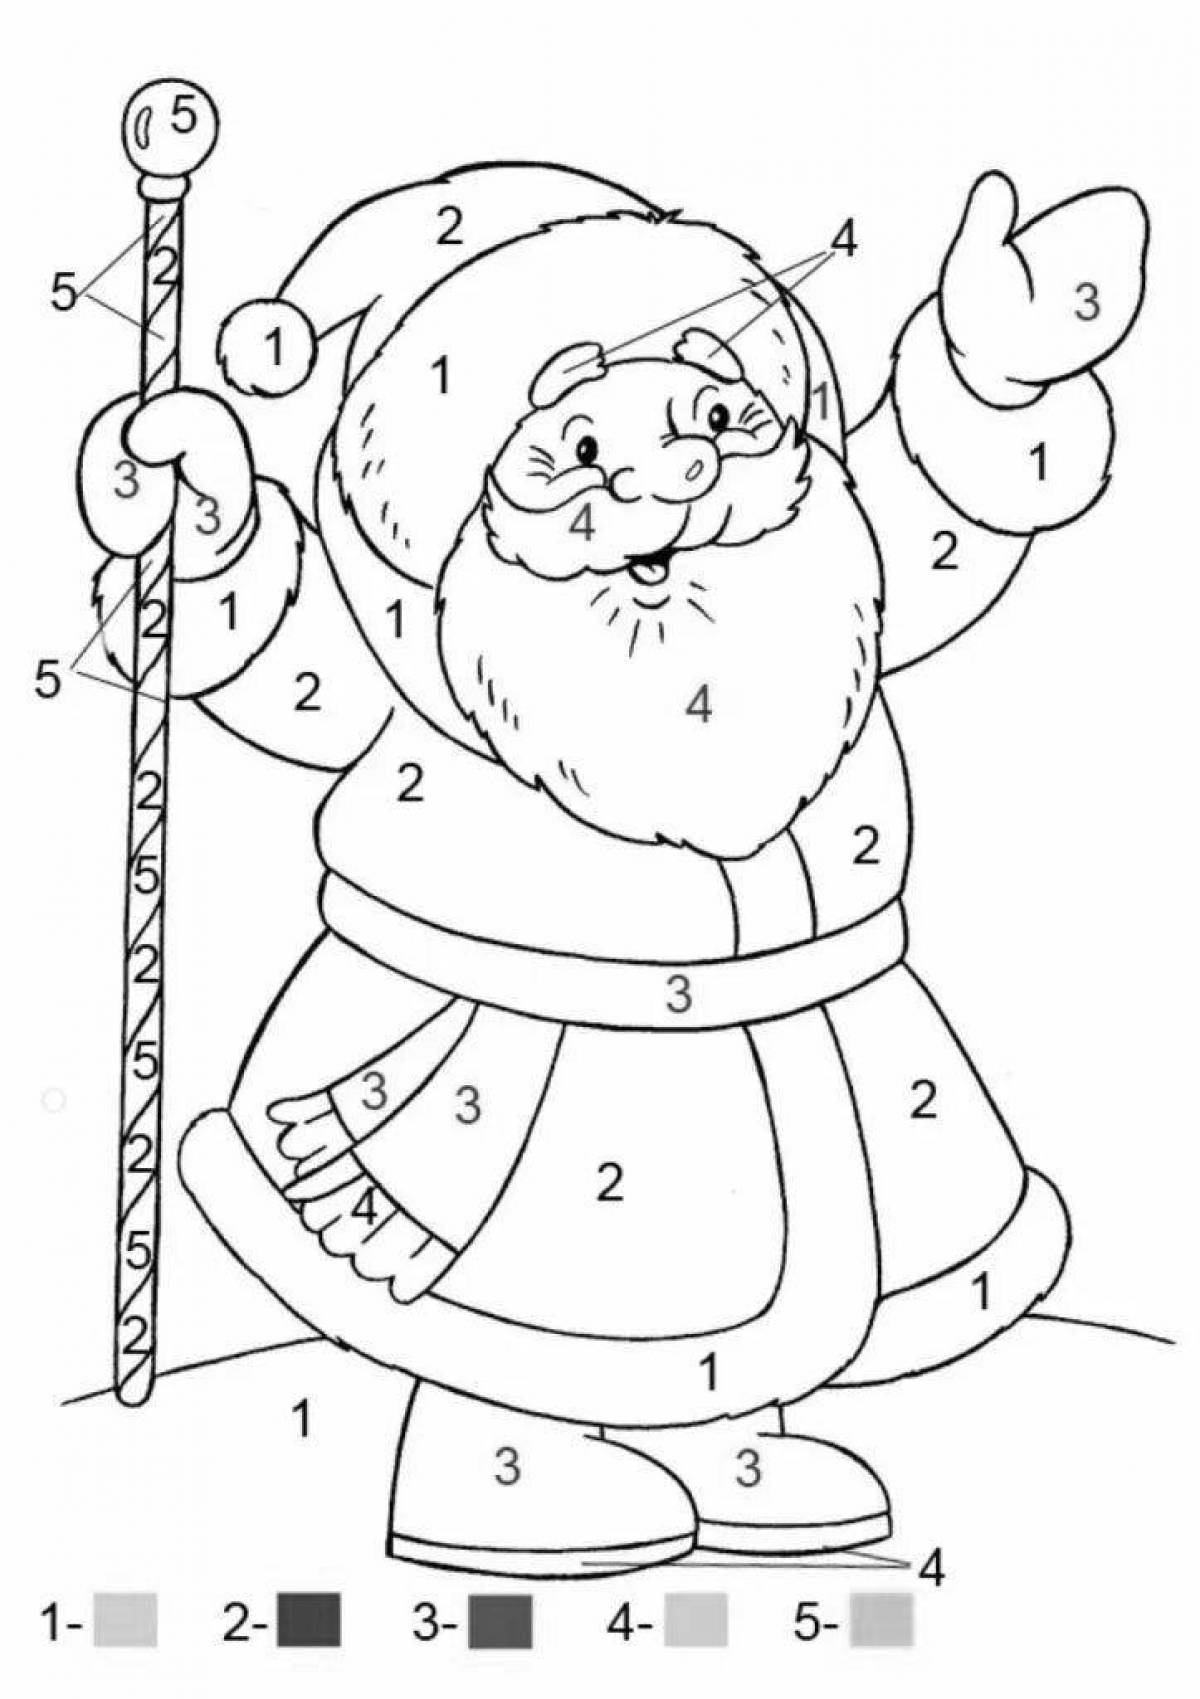 Colorful adventure Christmas math coloring book